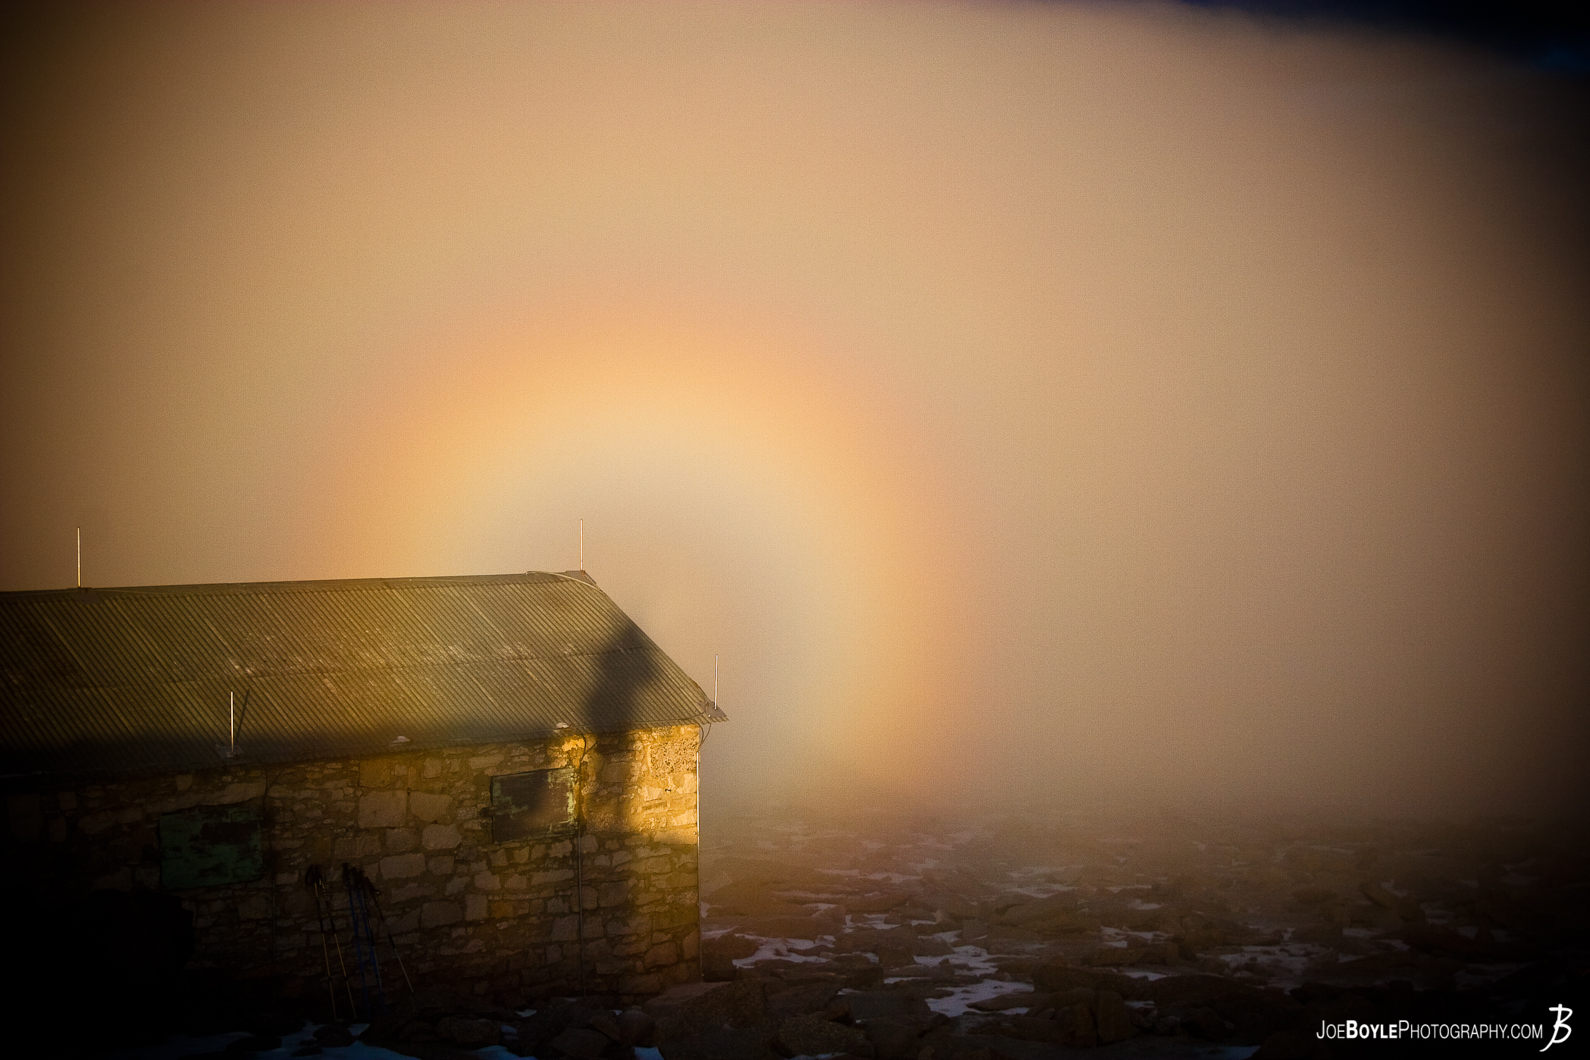  A cloud was covering the top of Mt. Whitney when we were at the top. Here is a photo of the hut that was built on top of the mountain. I thought it was so cool that there was a perfectly concentric rainbow in the middle of the cloud! 